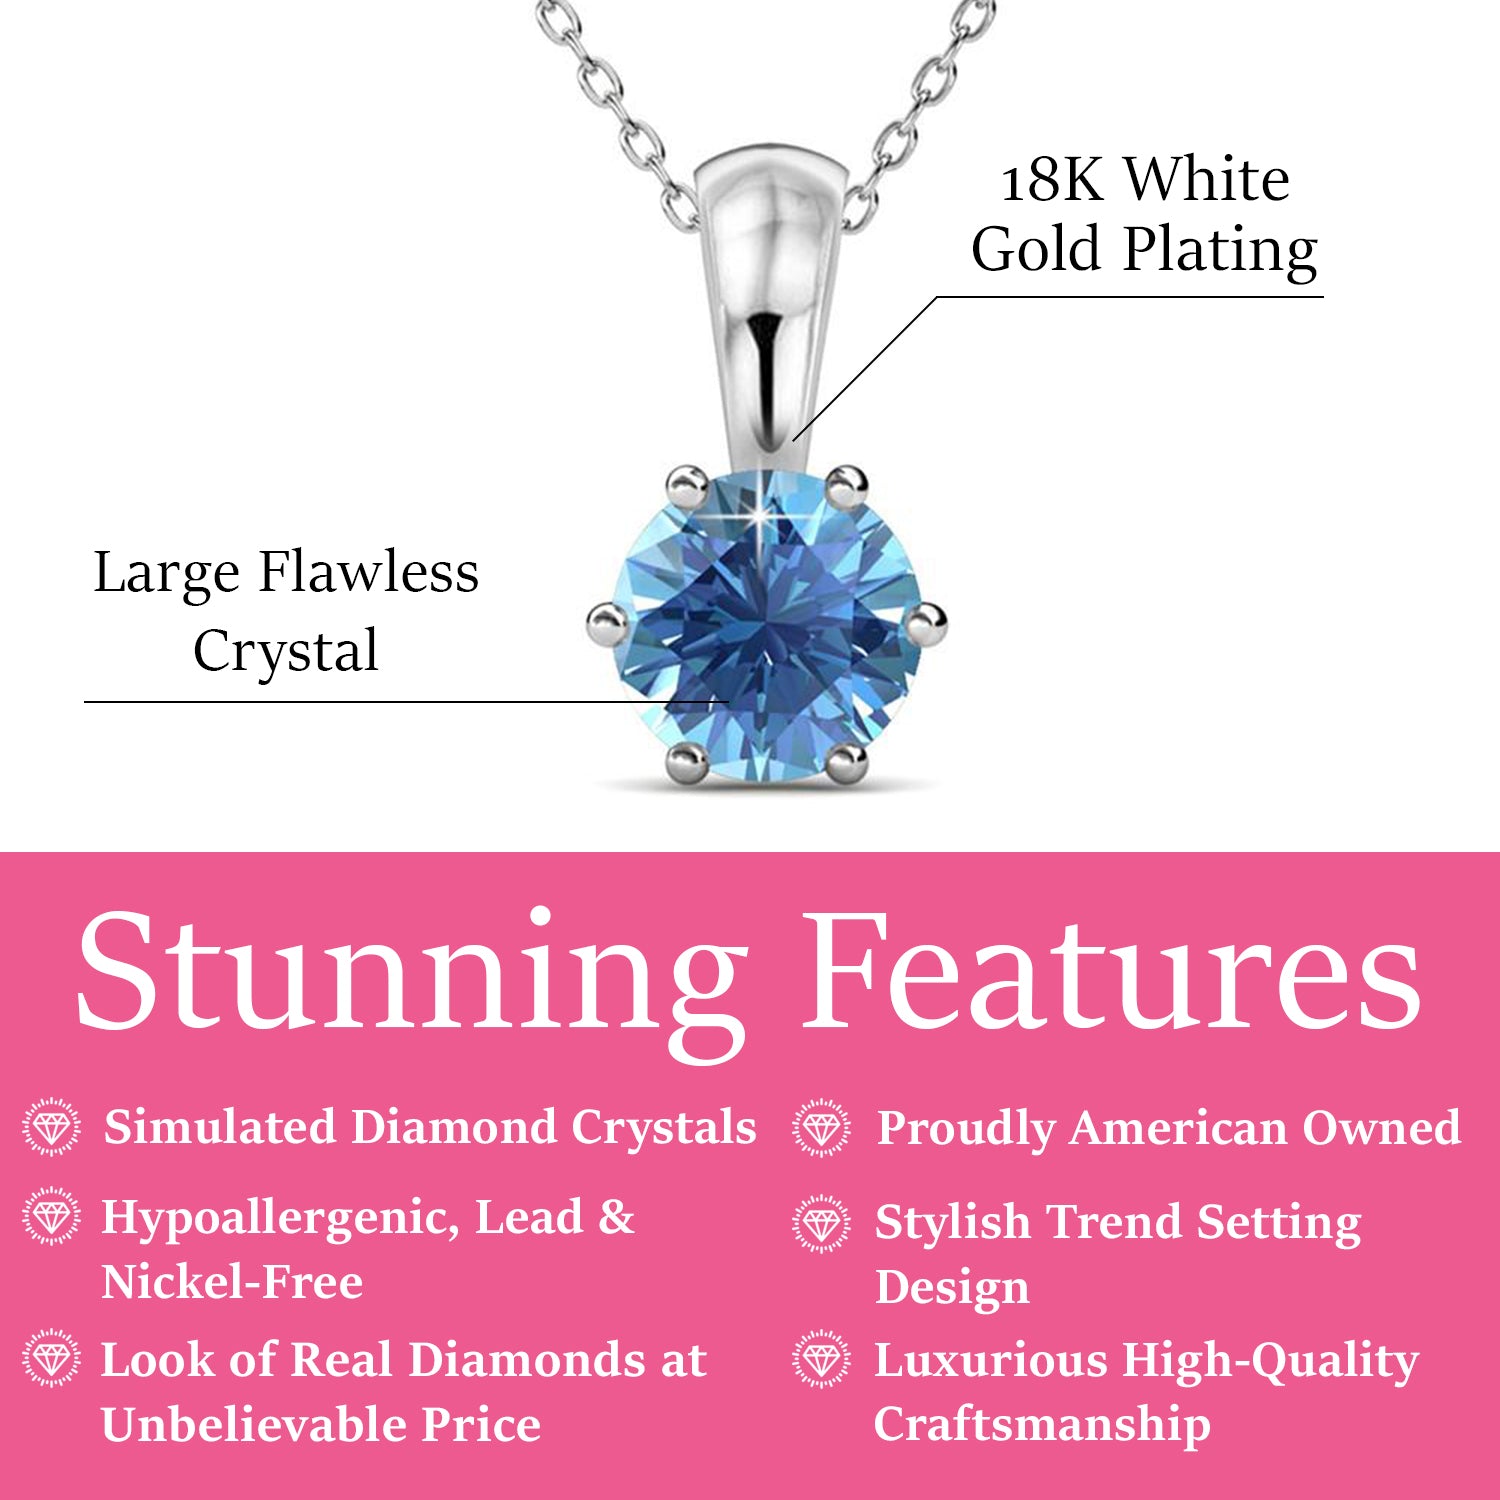 December Birthstone Blue Topaz Necklace, 18k White Gold Plated Solitaire Necklace with 1CT Crystal